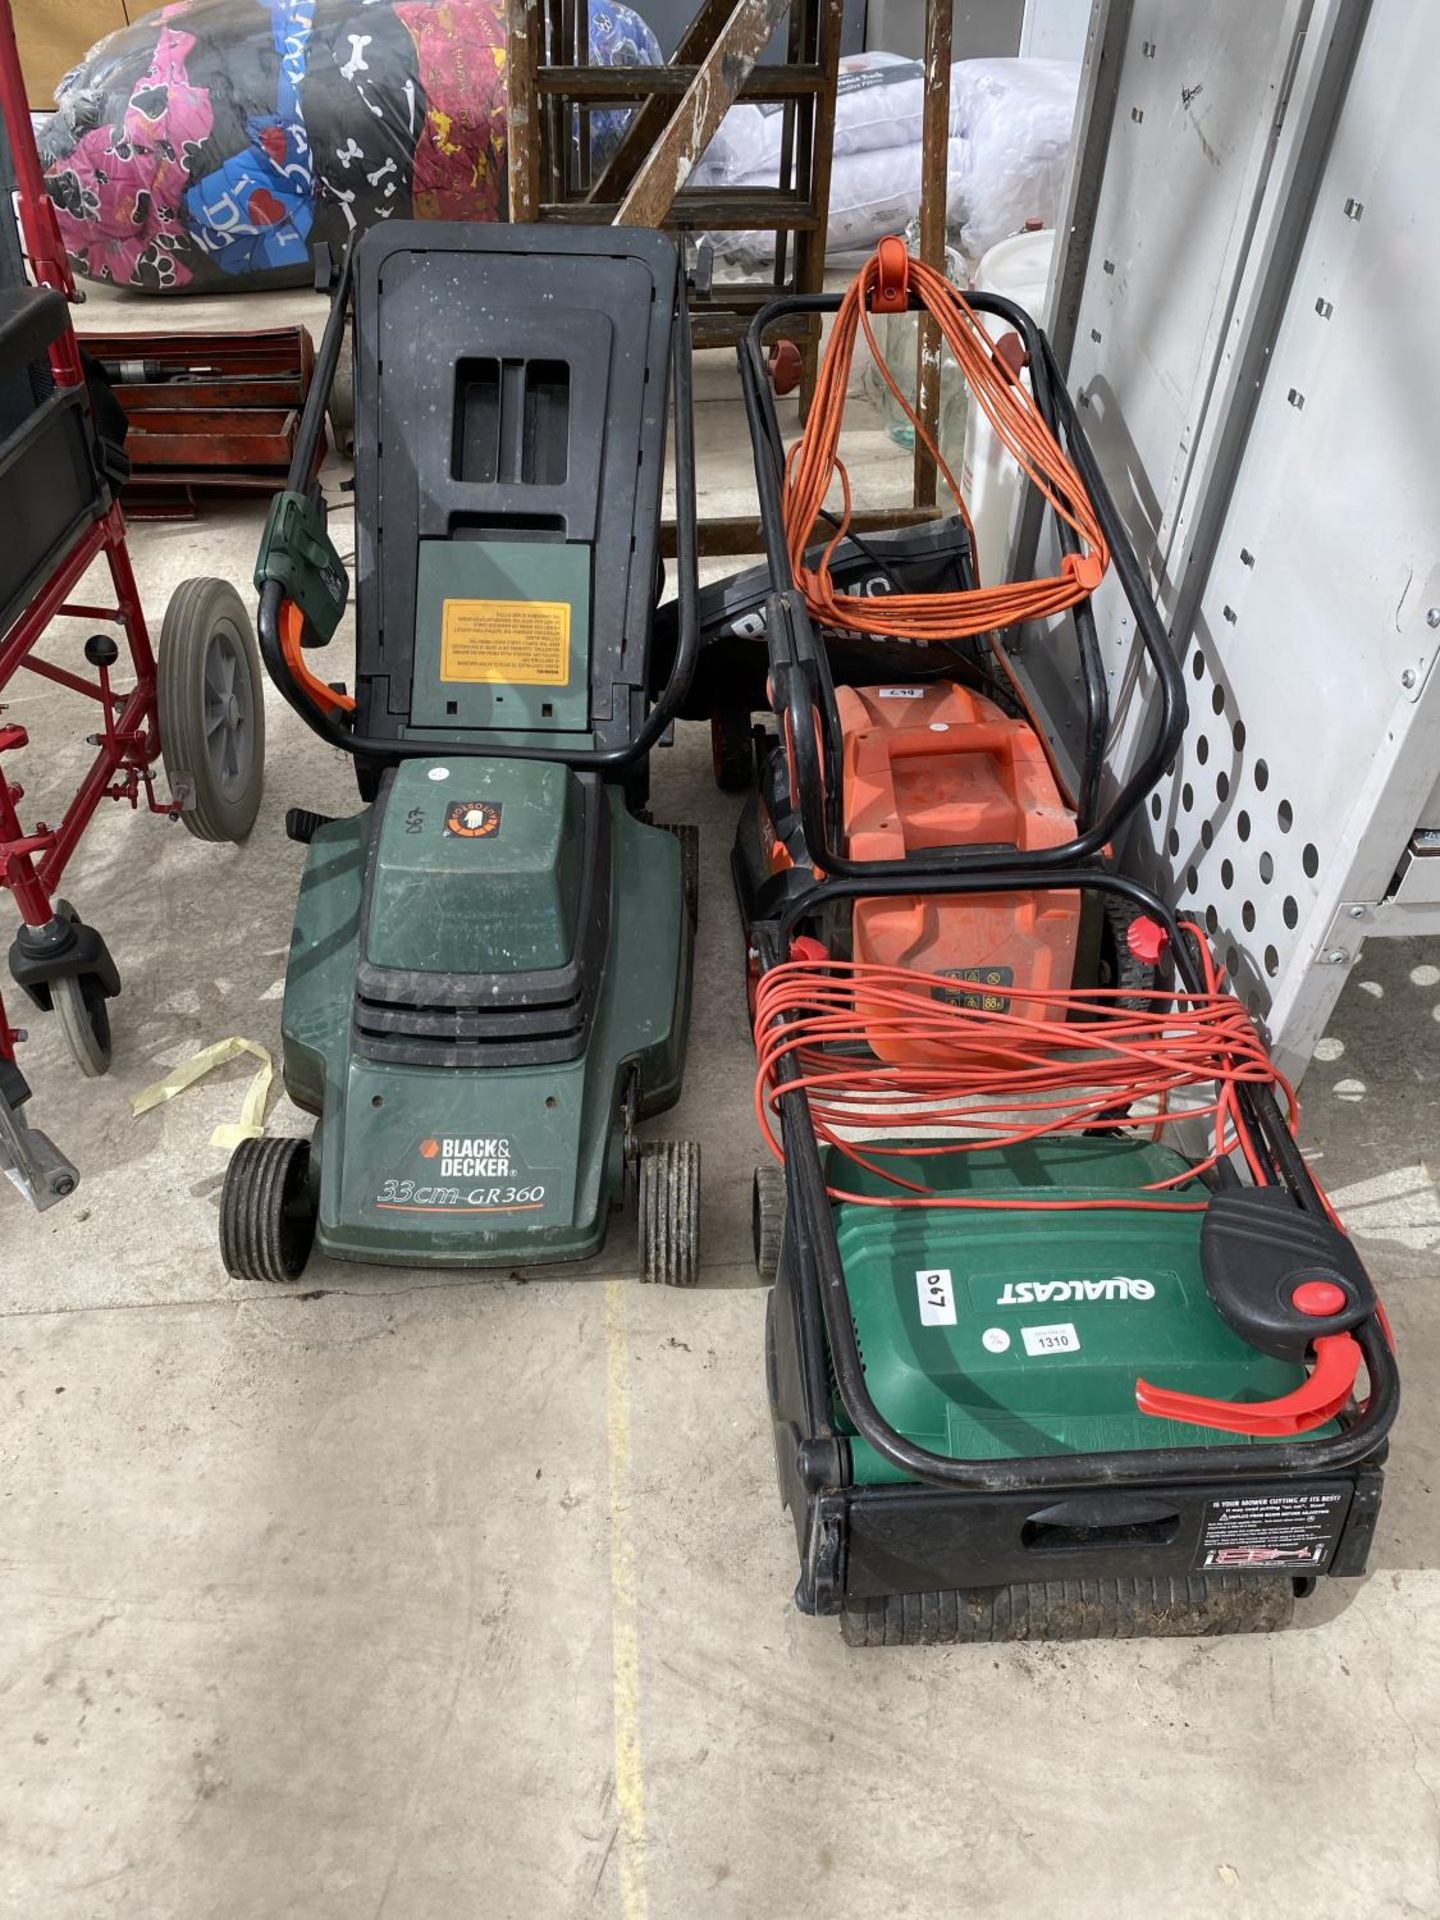 AN ELECTRIC SCARIFIER AND TWO LAWN MOWERS, ALL IN WORKING ORDER